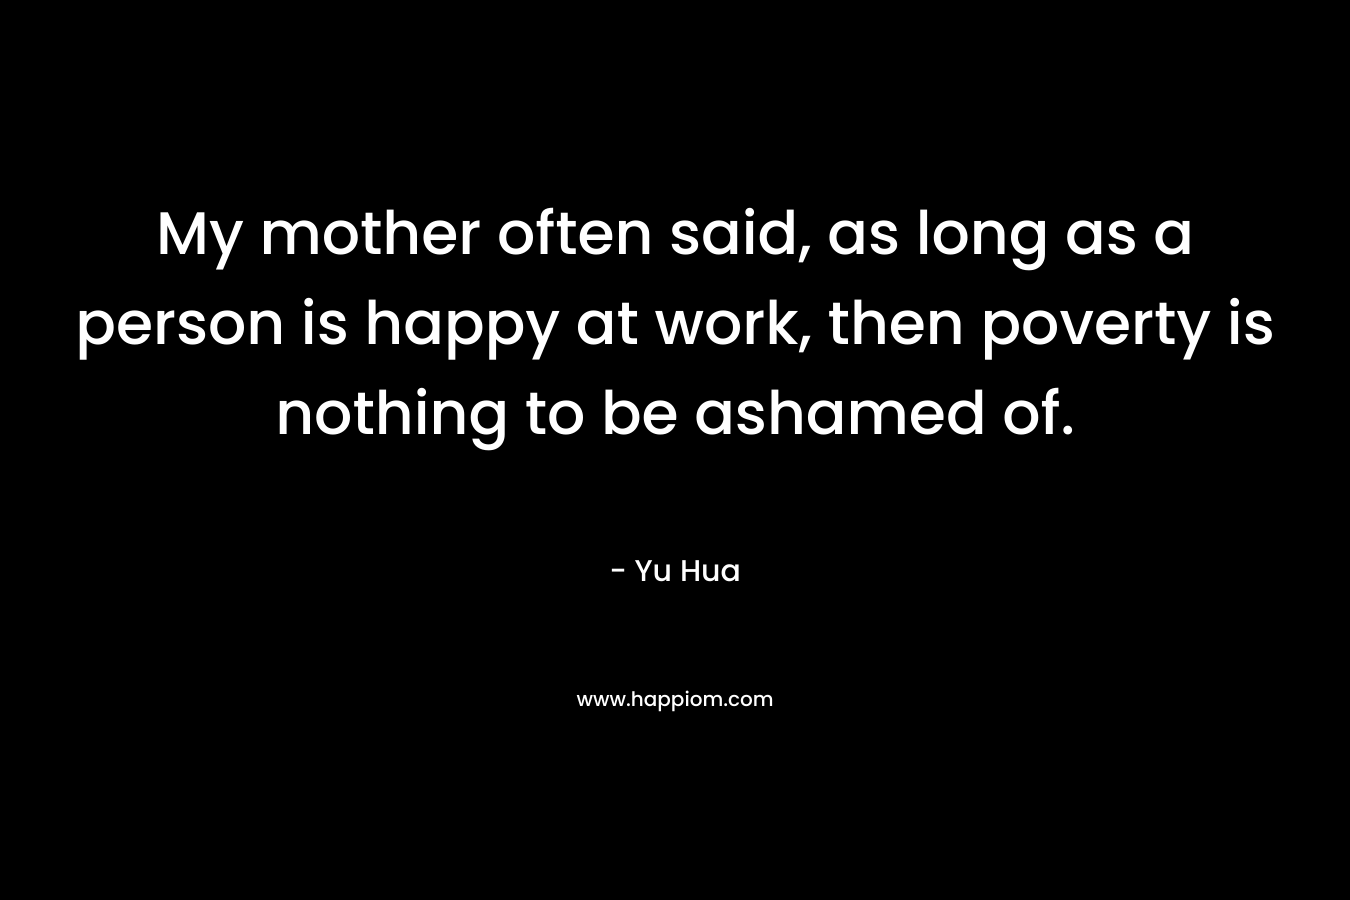 My mother often said, as long as a person is happy at work, then poverty is nothing to be ashamed of.